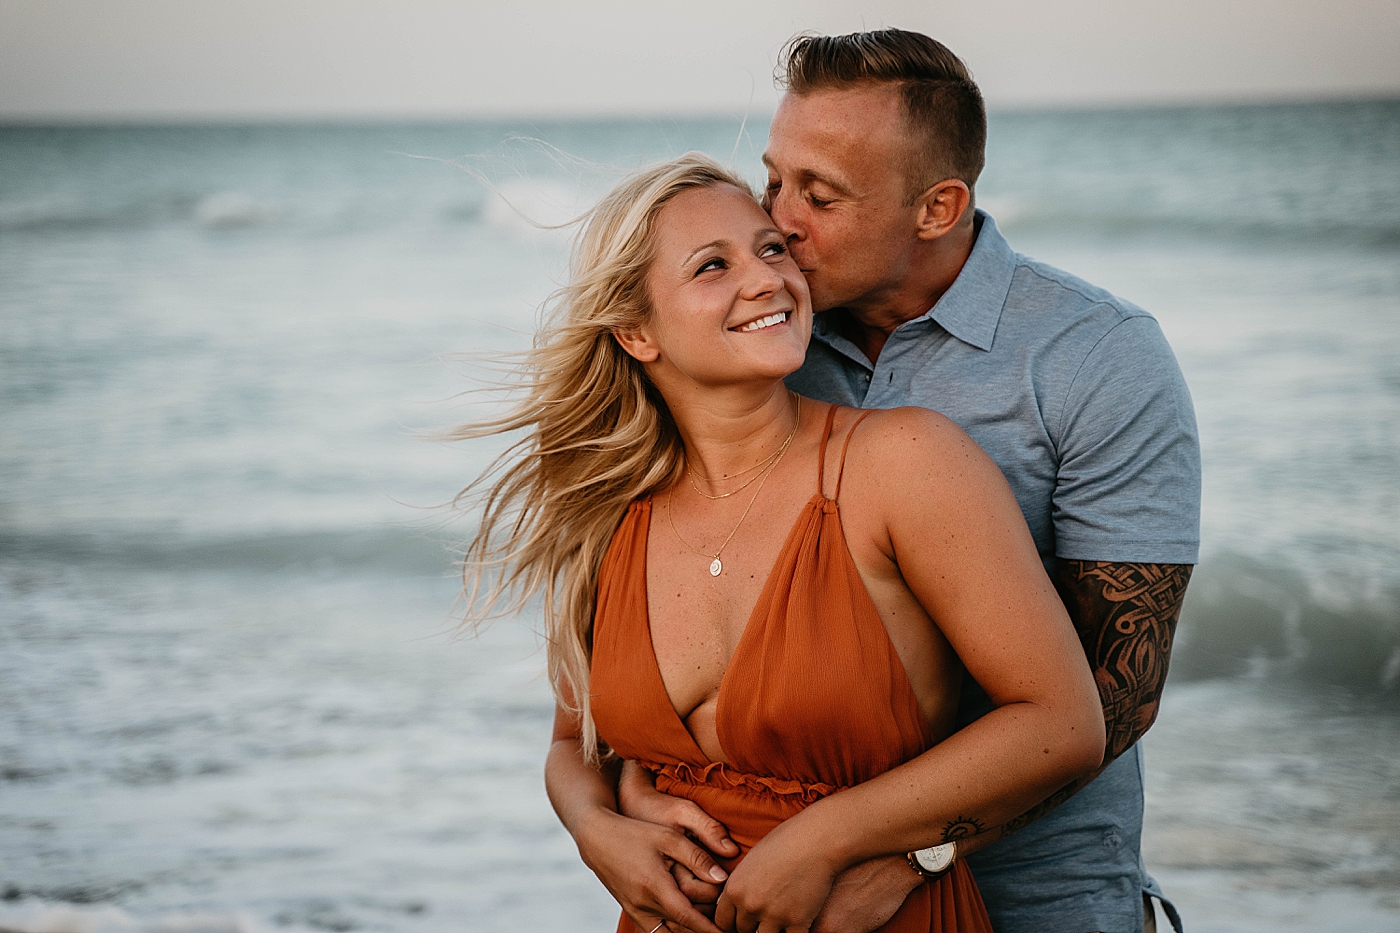 Man holding woman in front of the ocean kissing her Jupiter Beach Engagement Photography captured by South Florida Engagement Photographer Krystal Capone Photography 